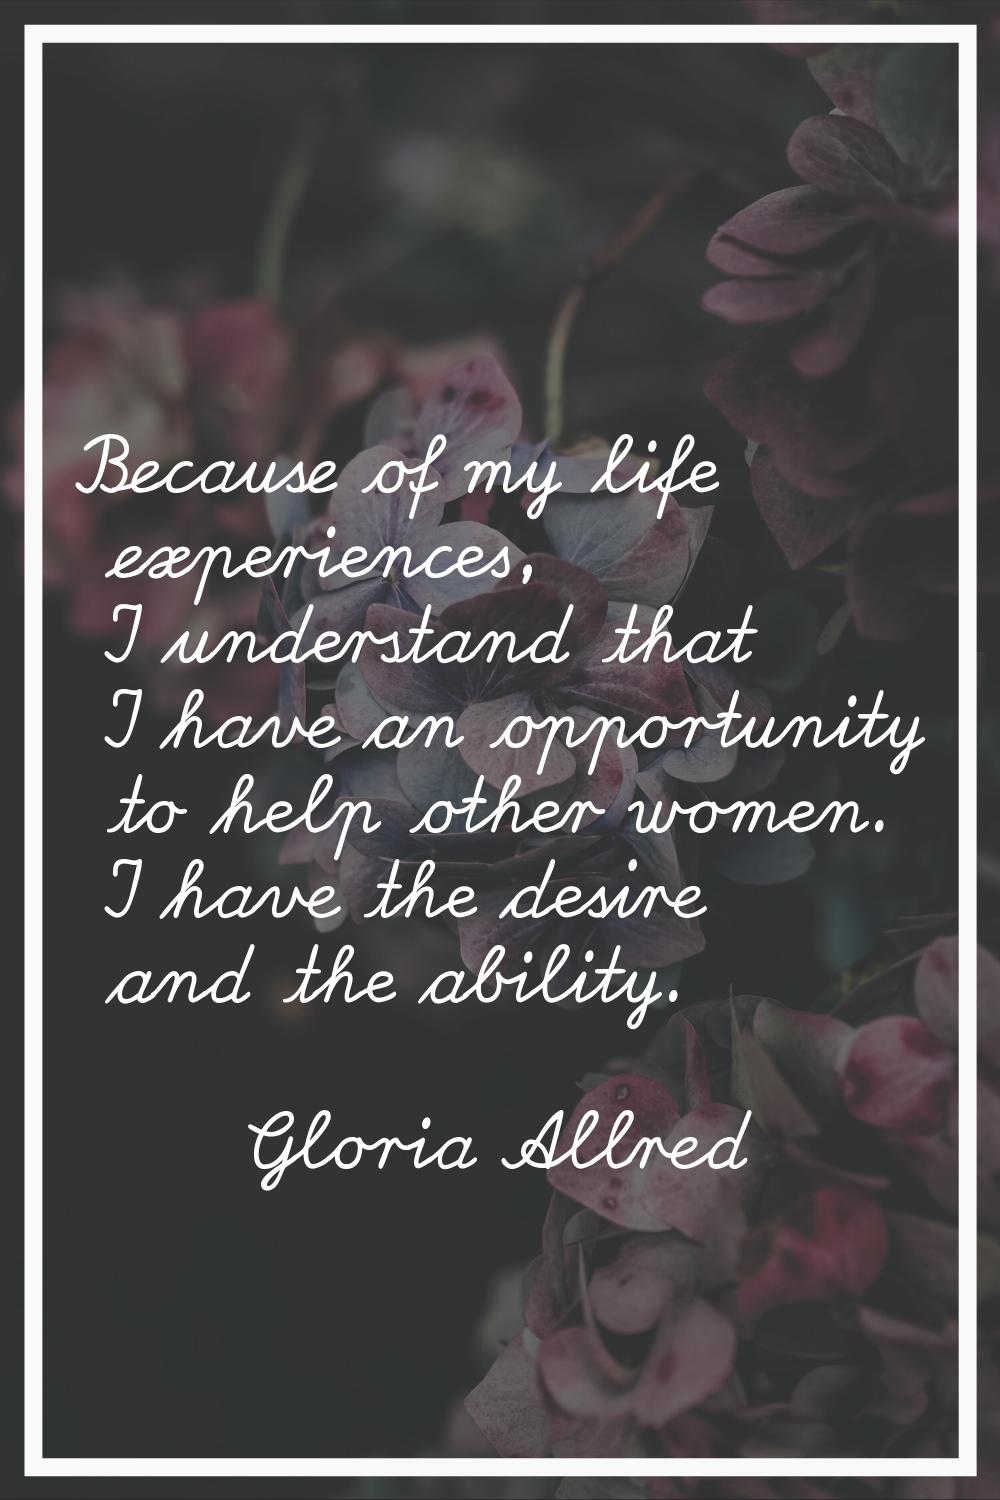 Because of my life experiences, I understand that I have an opportunity to help other women. I have